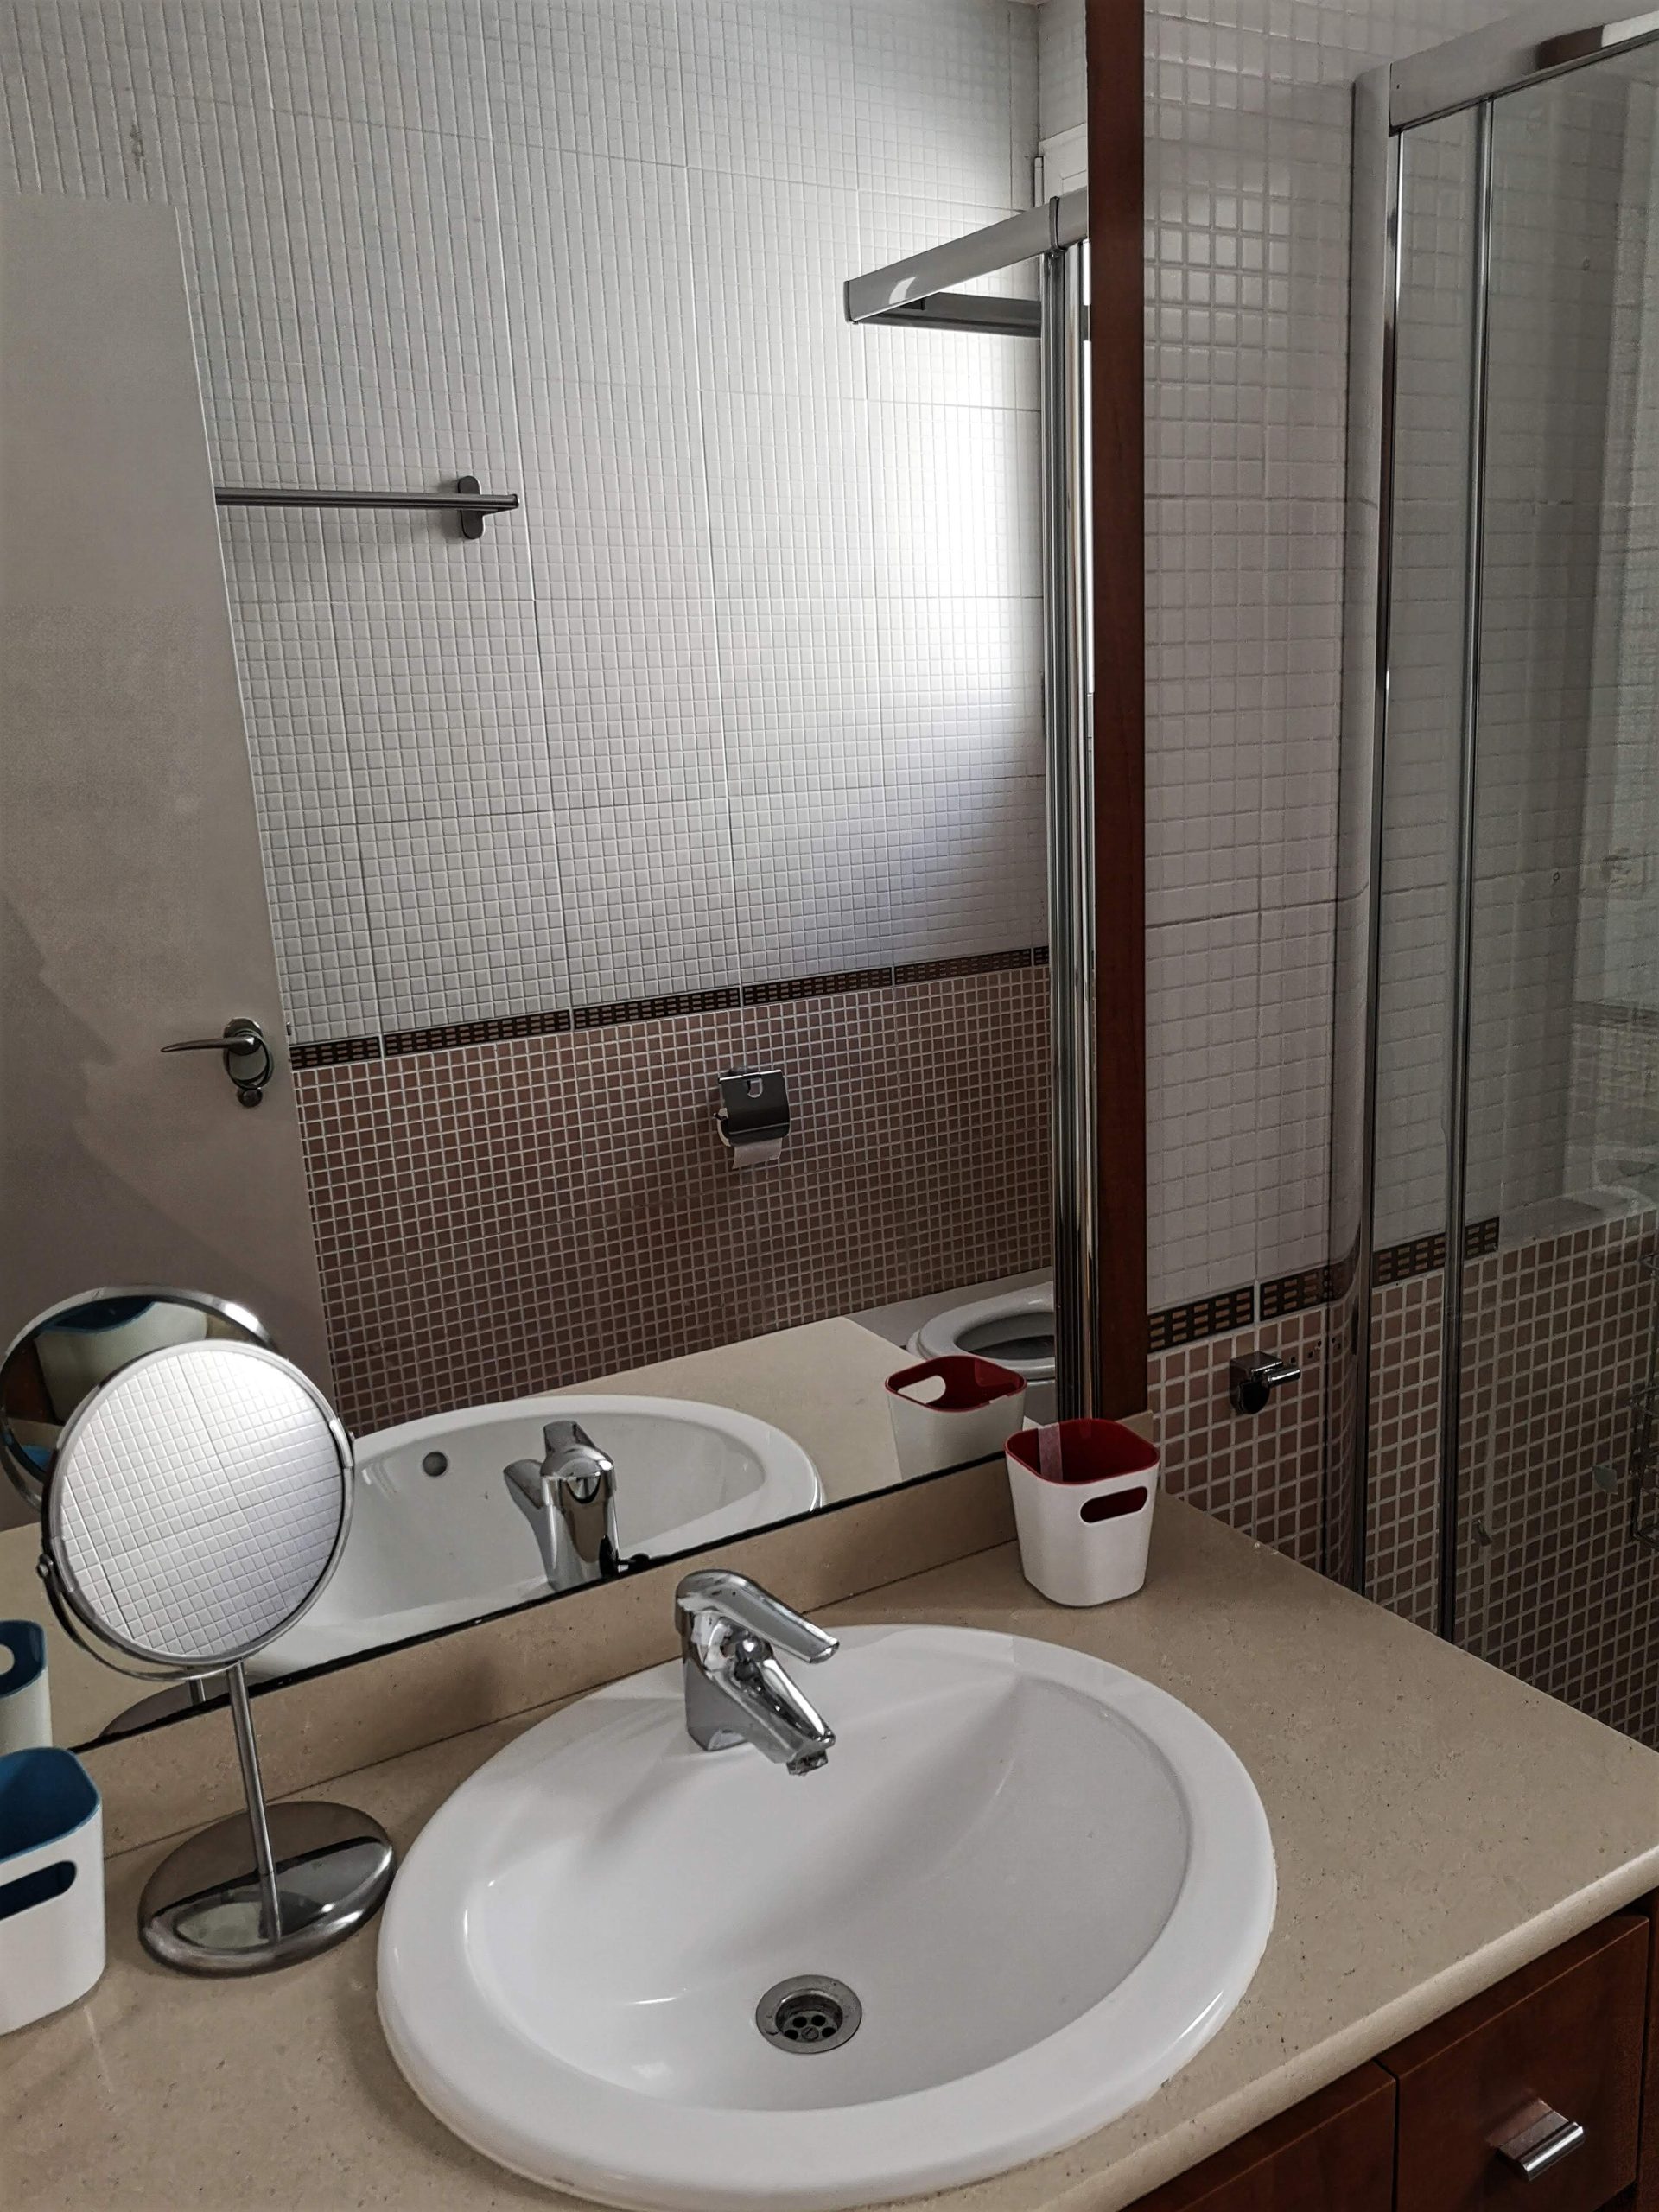 Aparment for rent in Valencia - bathroom